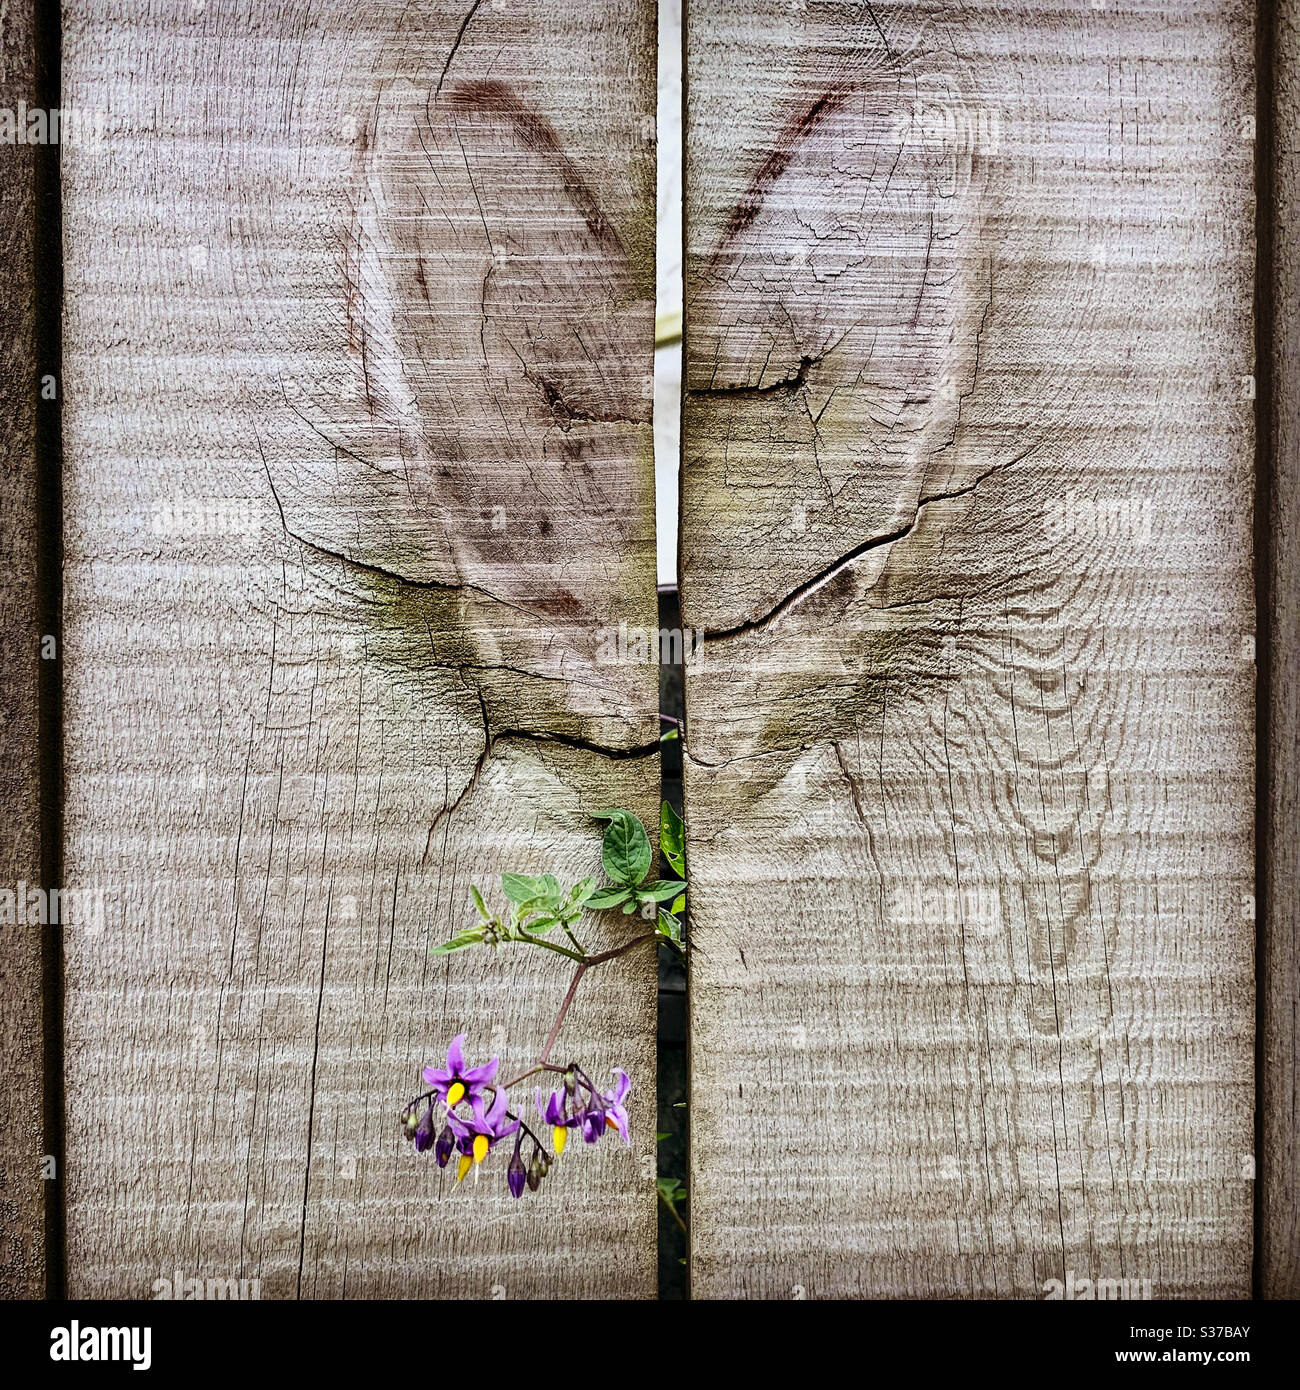 Purple Belladonna plant growing out of heart on wooden fence Stock Photo